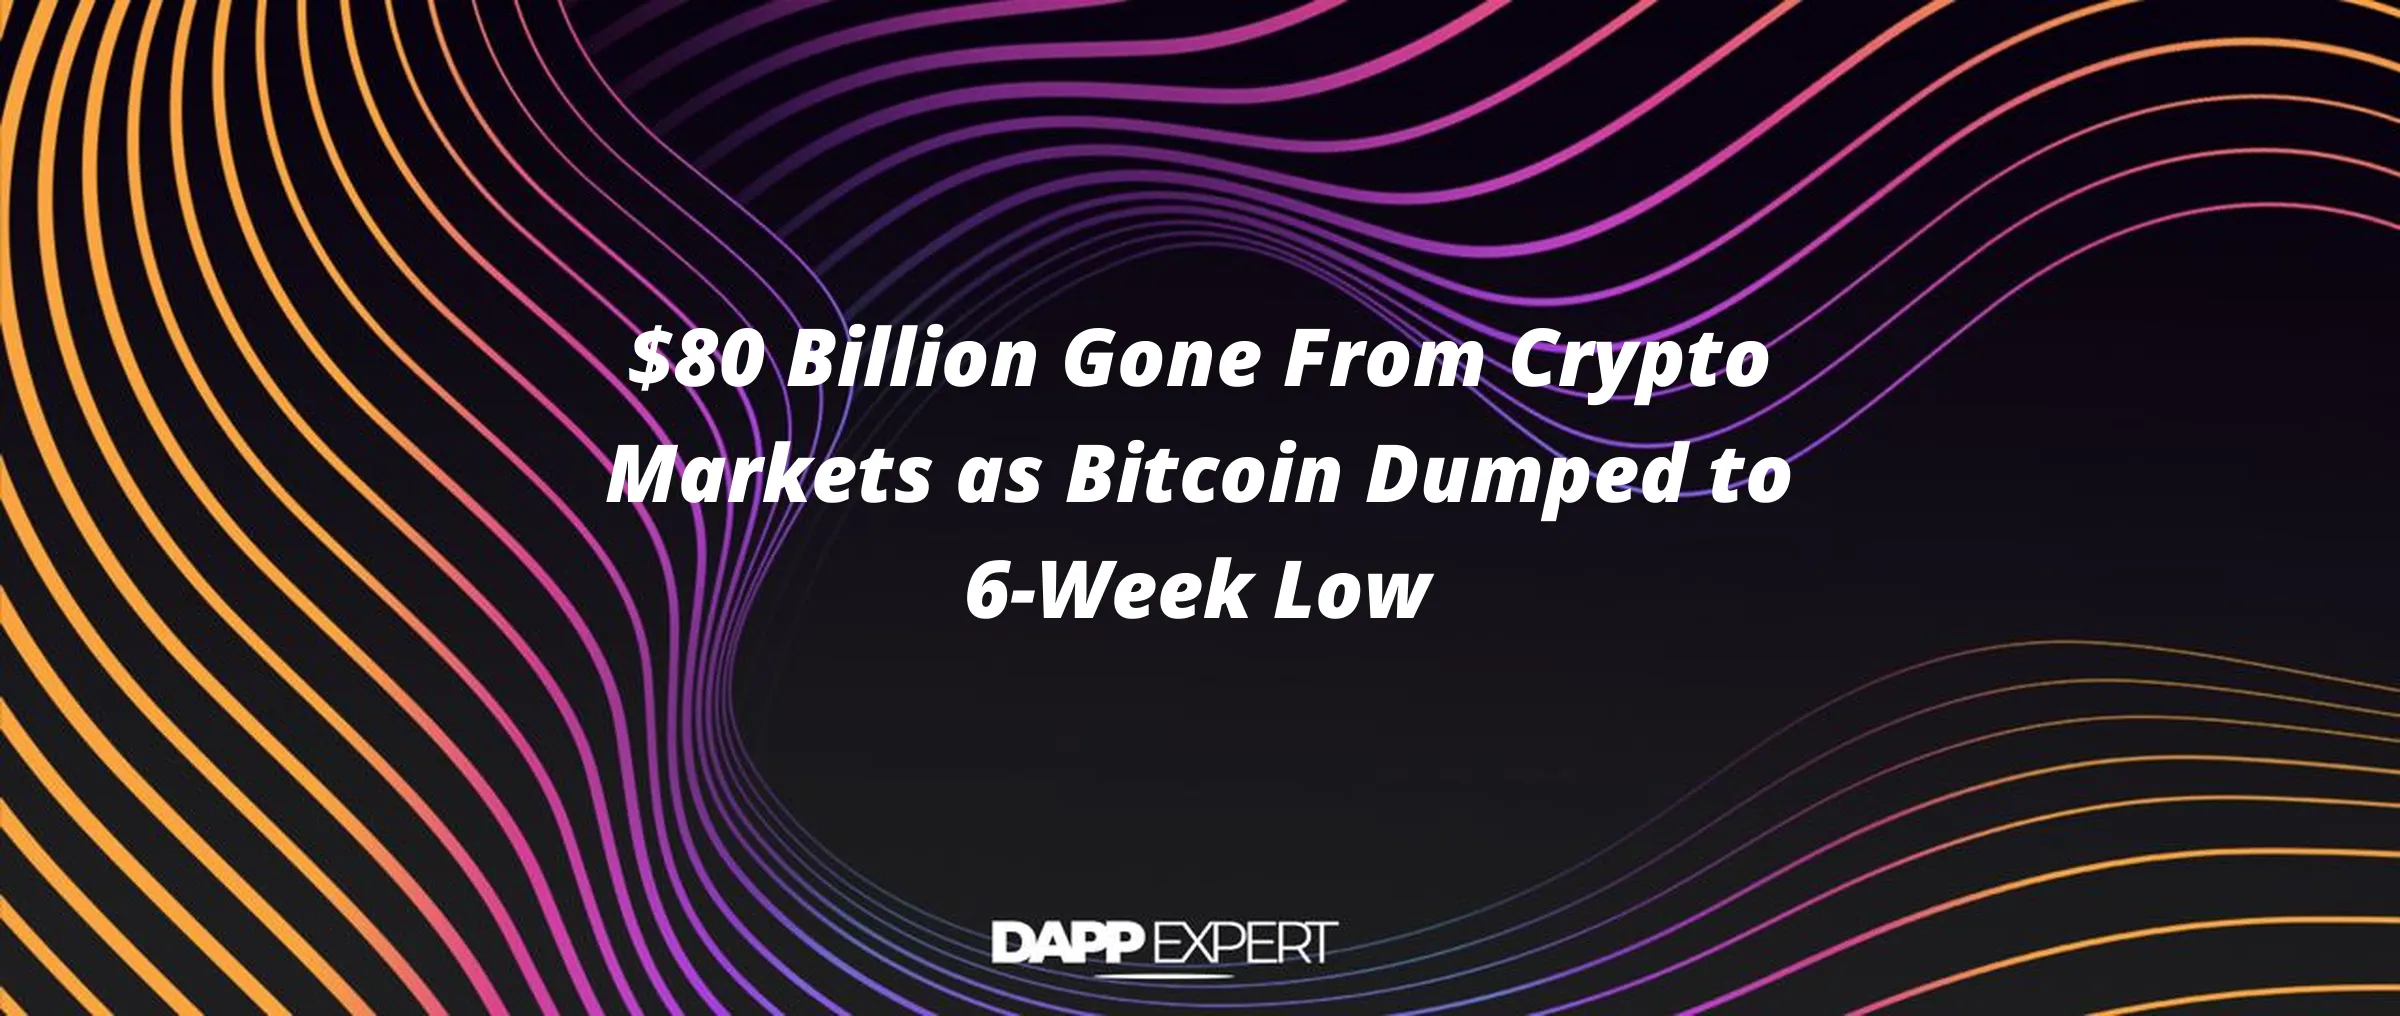 $80 Billion Gone From Crypto Markets as Bitcoin Dumped to 6-Week Low